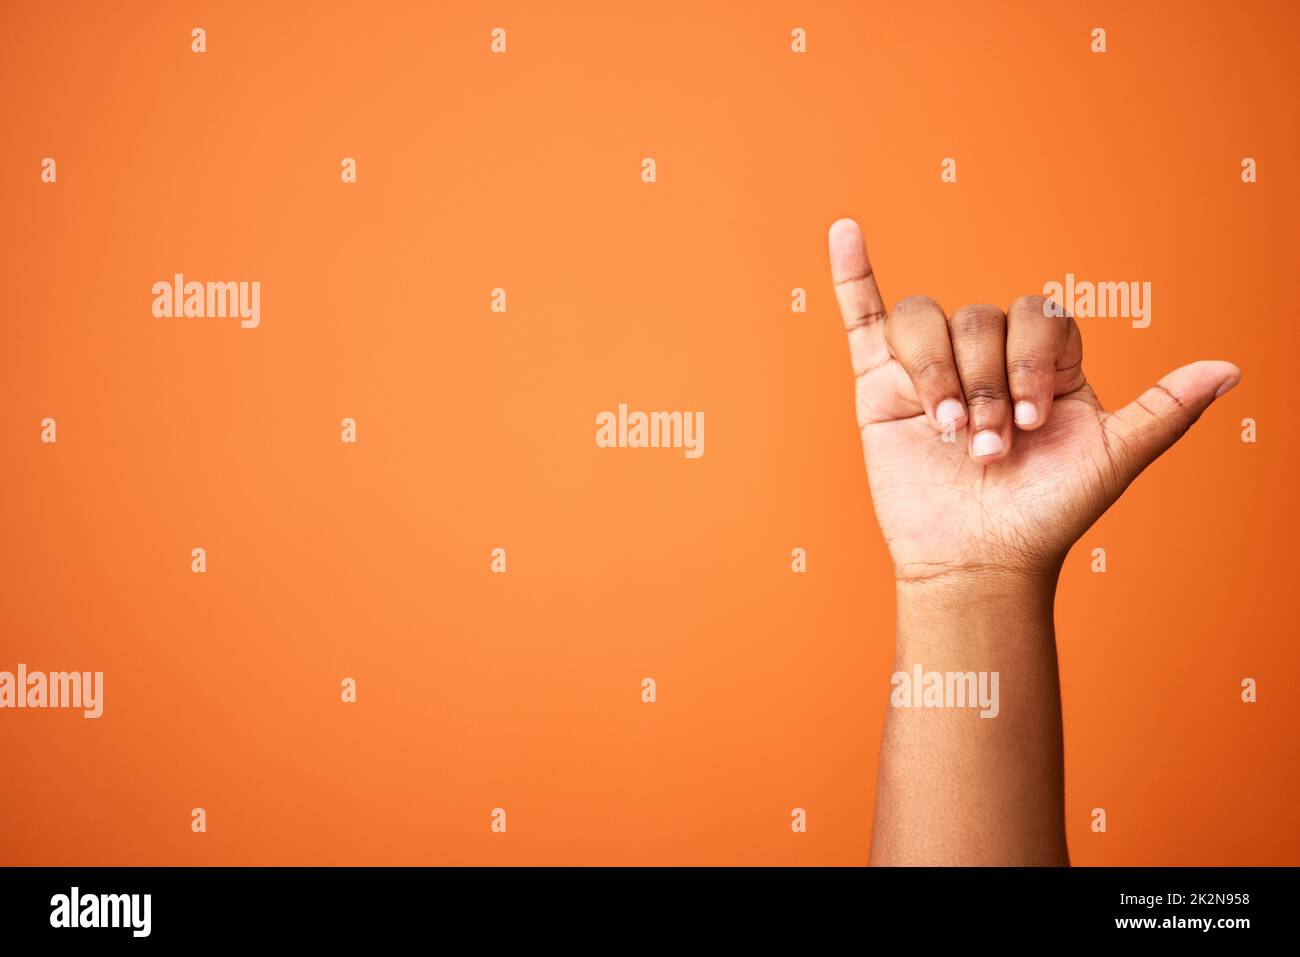 Lifes great. Shot of an unrecognizable person showing a shaka sign against an orange background. Stock Photo